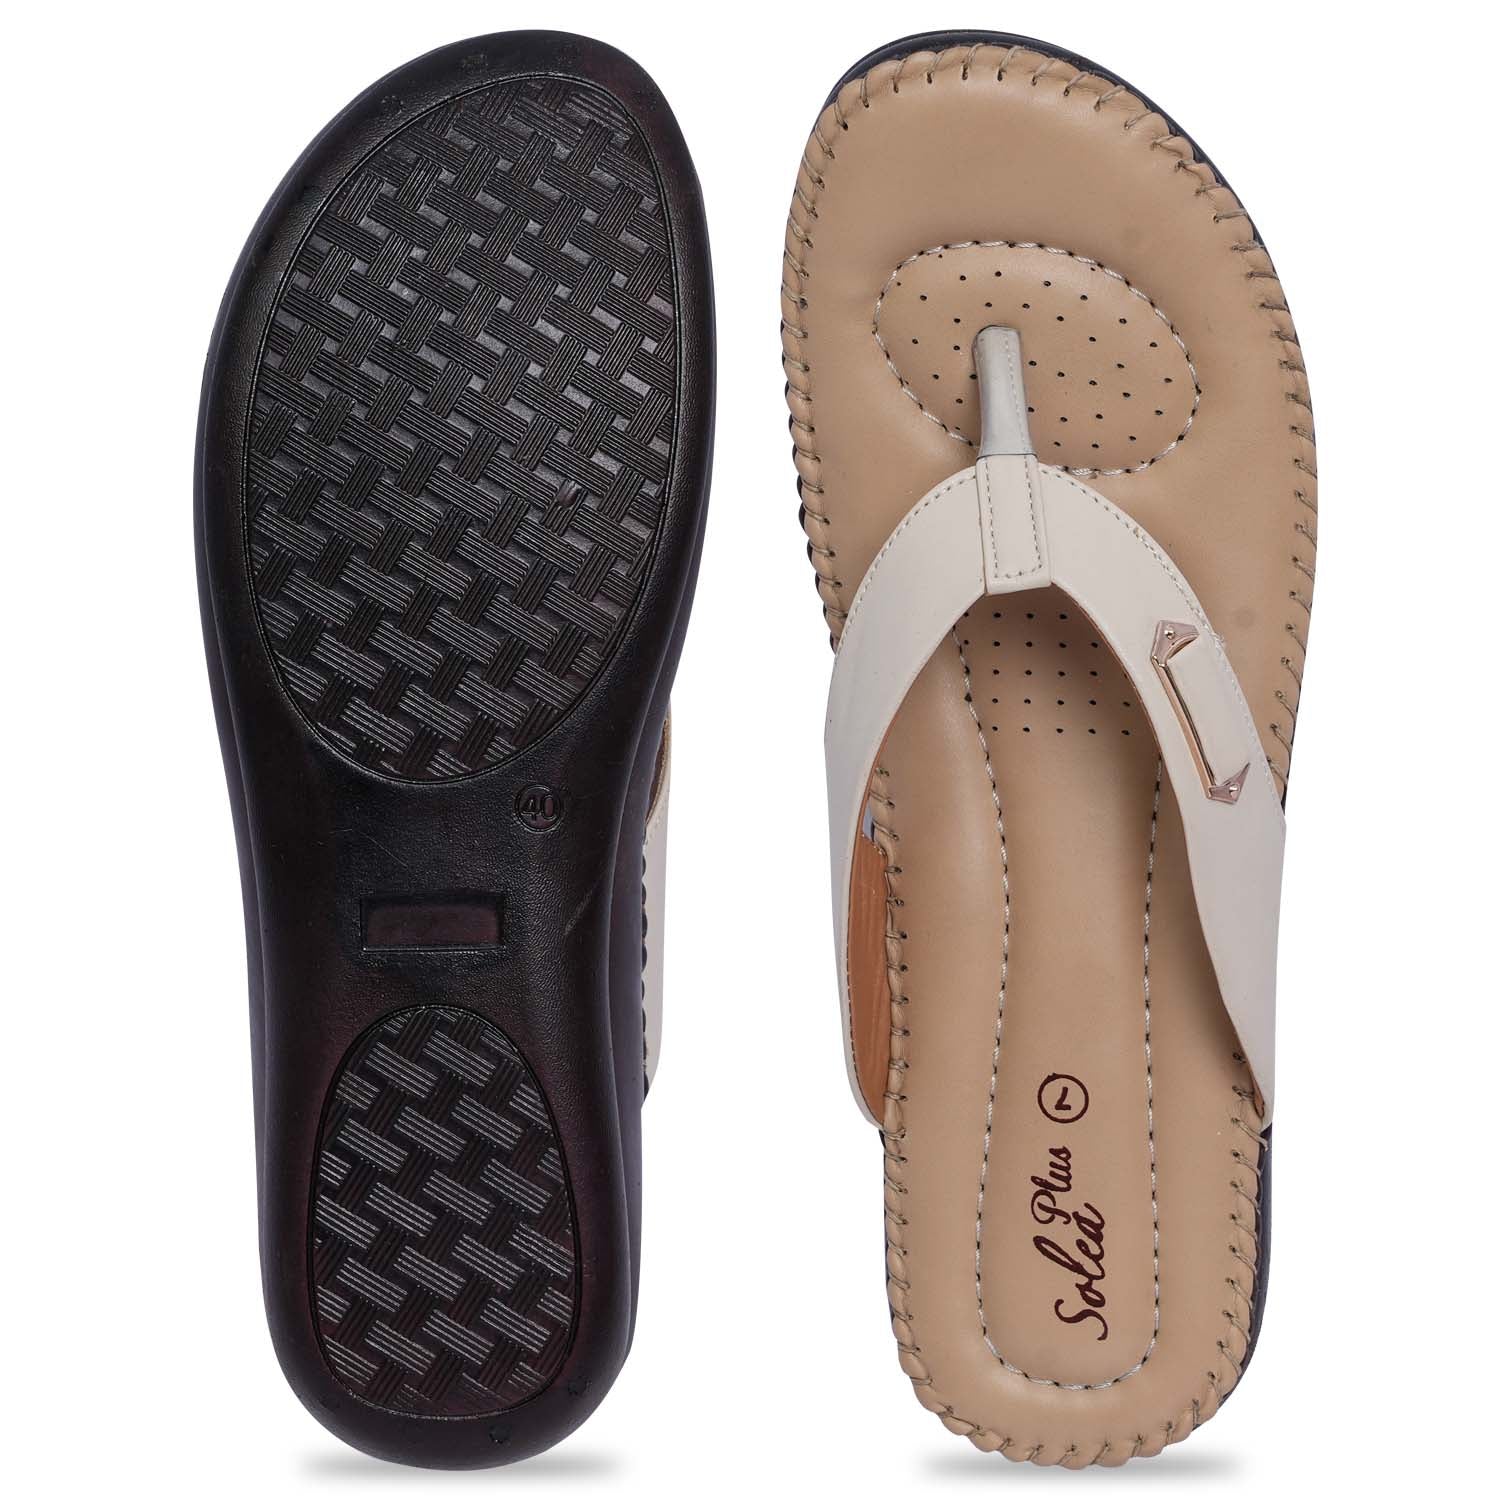 Paragon R1014L Women Sandals | Casual &amp; Formal Sandals | Stylish, Comfortable &amp; Durable | For Daily &amp; Occasion Wear